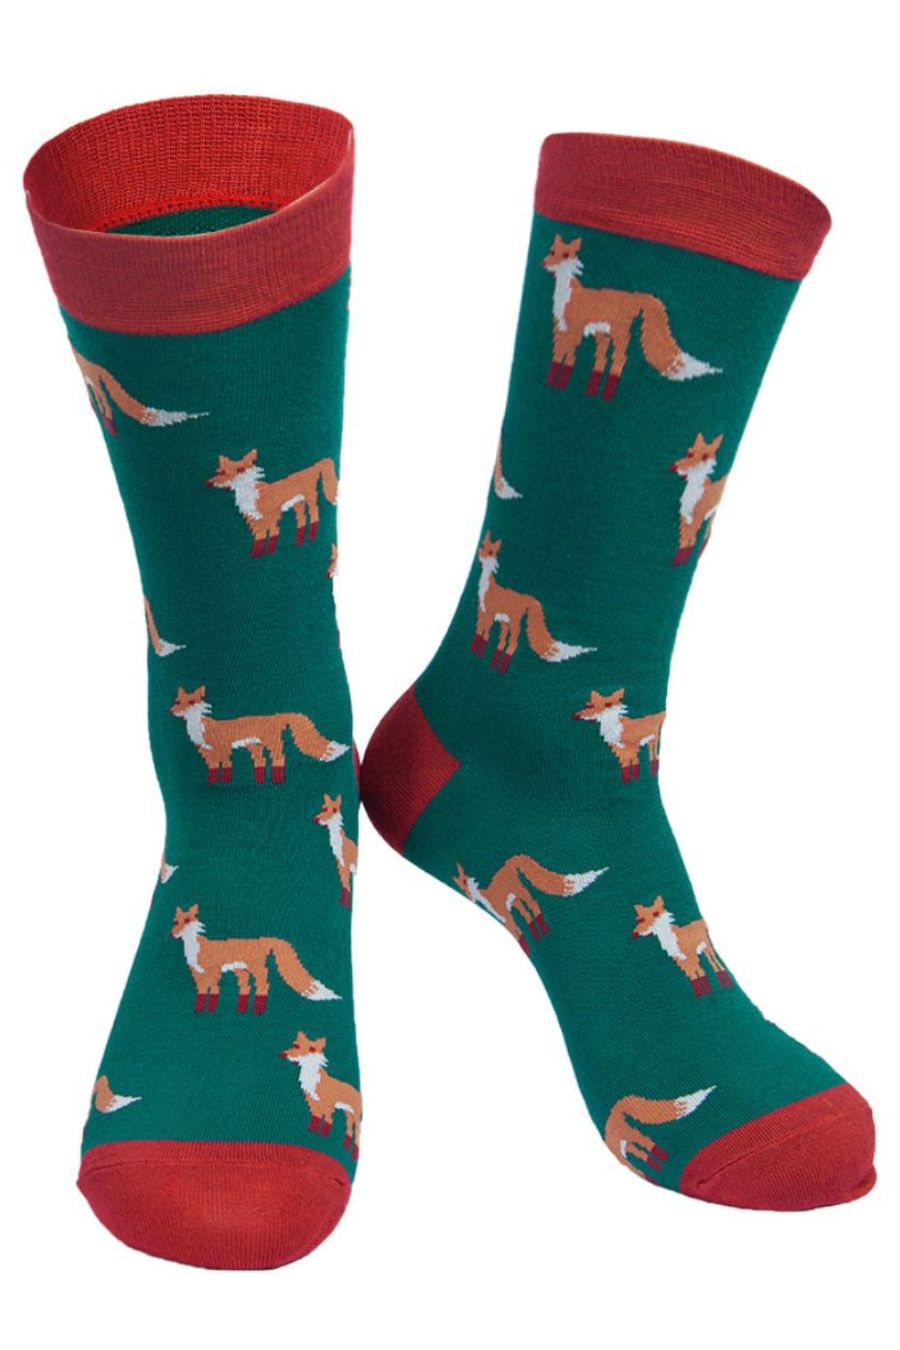 green and red bamboo socks with foxes on them